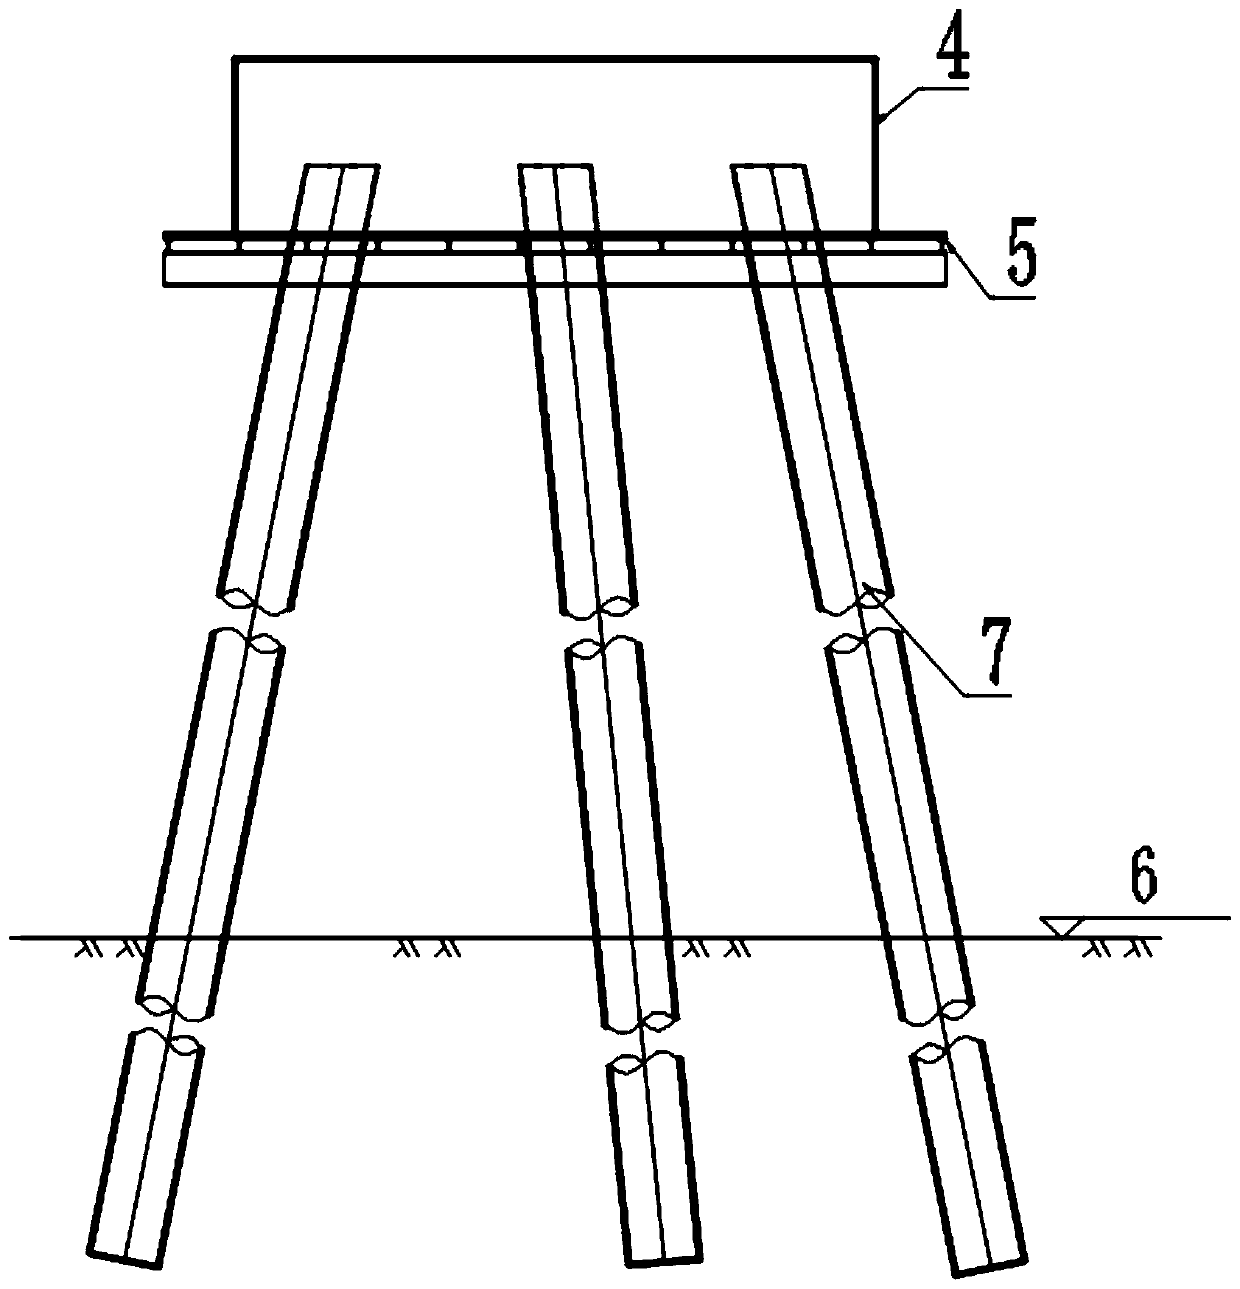 Rapid construction method for underwater isolated pier support platform